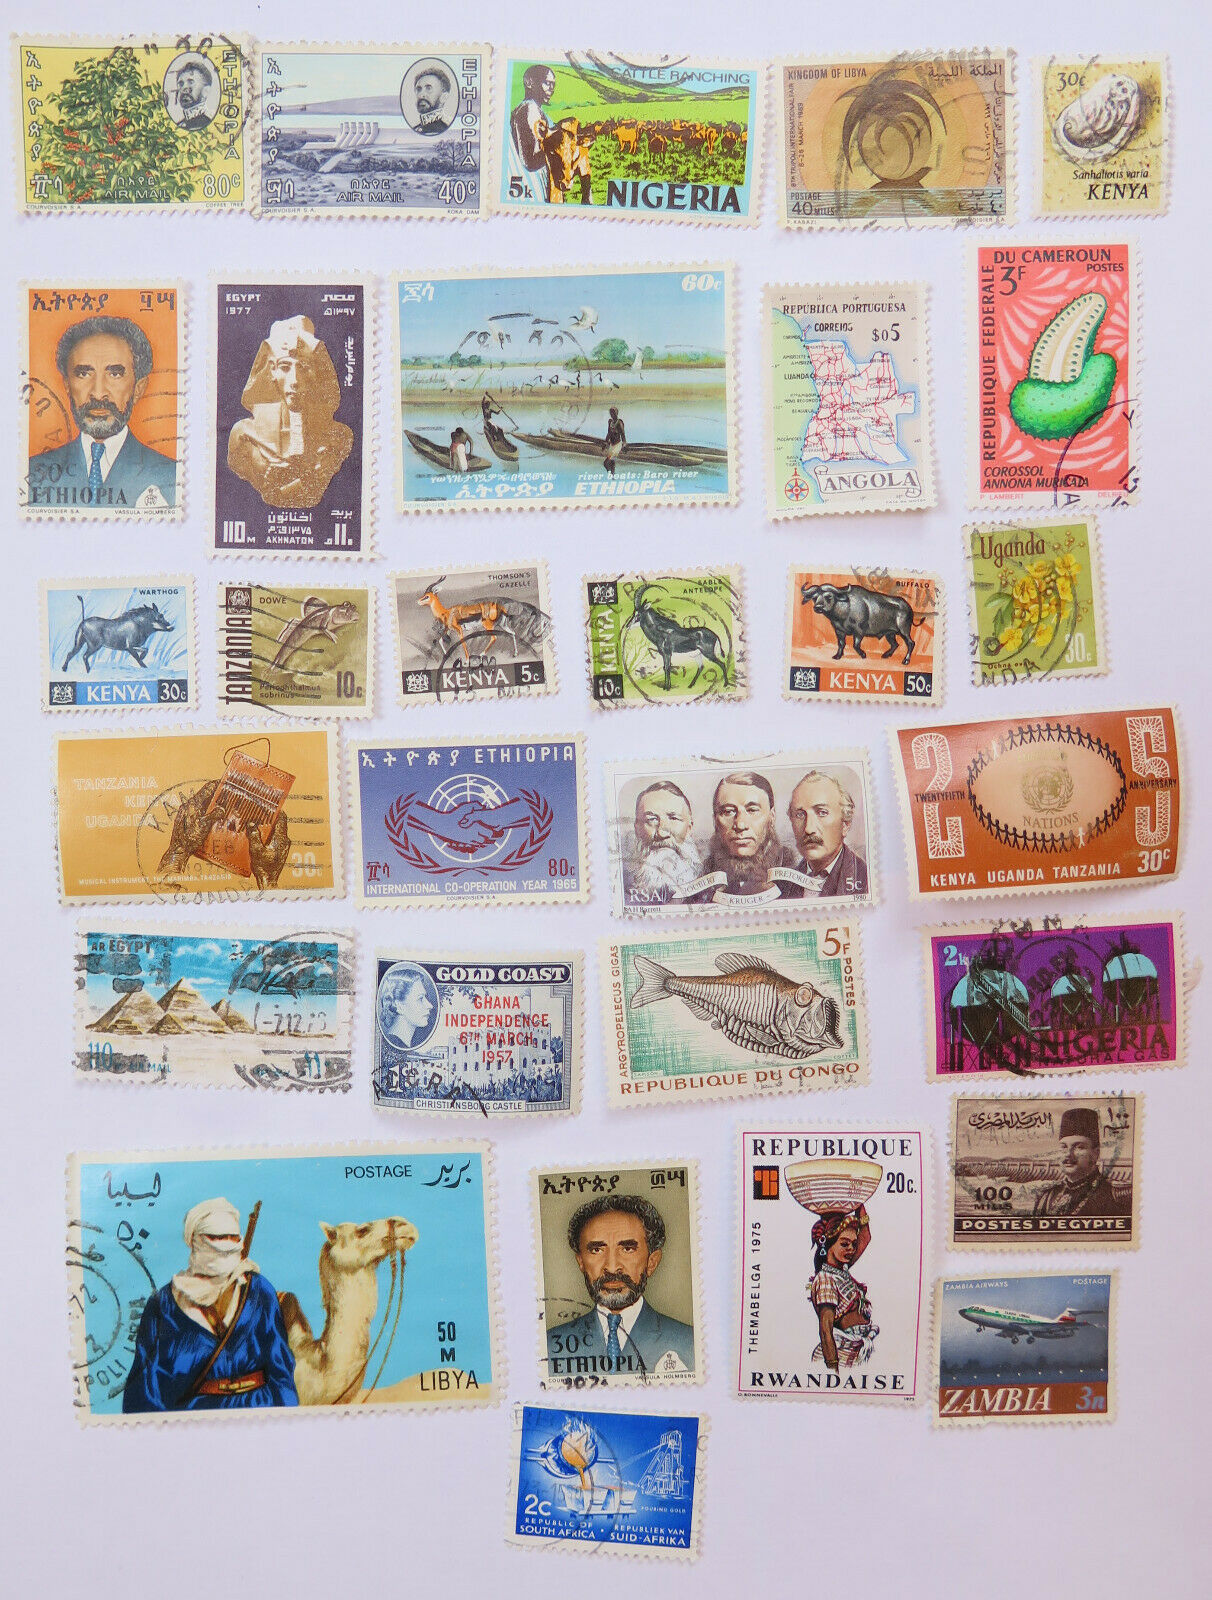 Africa 30 Postage Stamps 15 Countries Kenya Ethiopia South Africa Egypt Etc